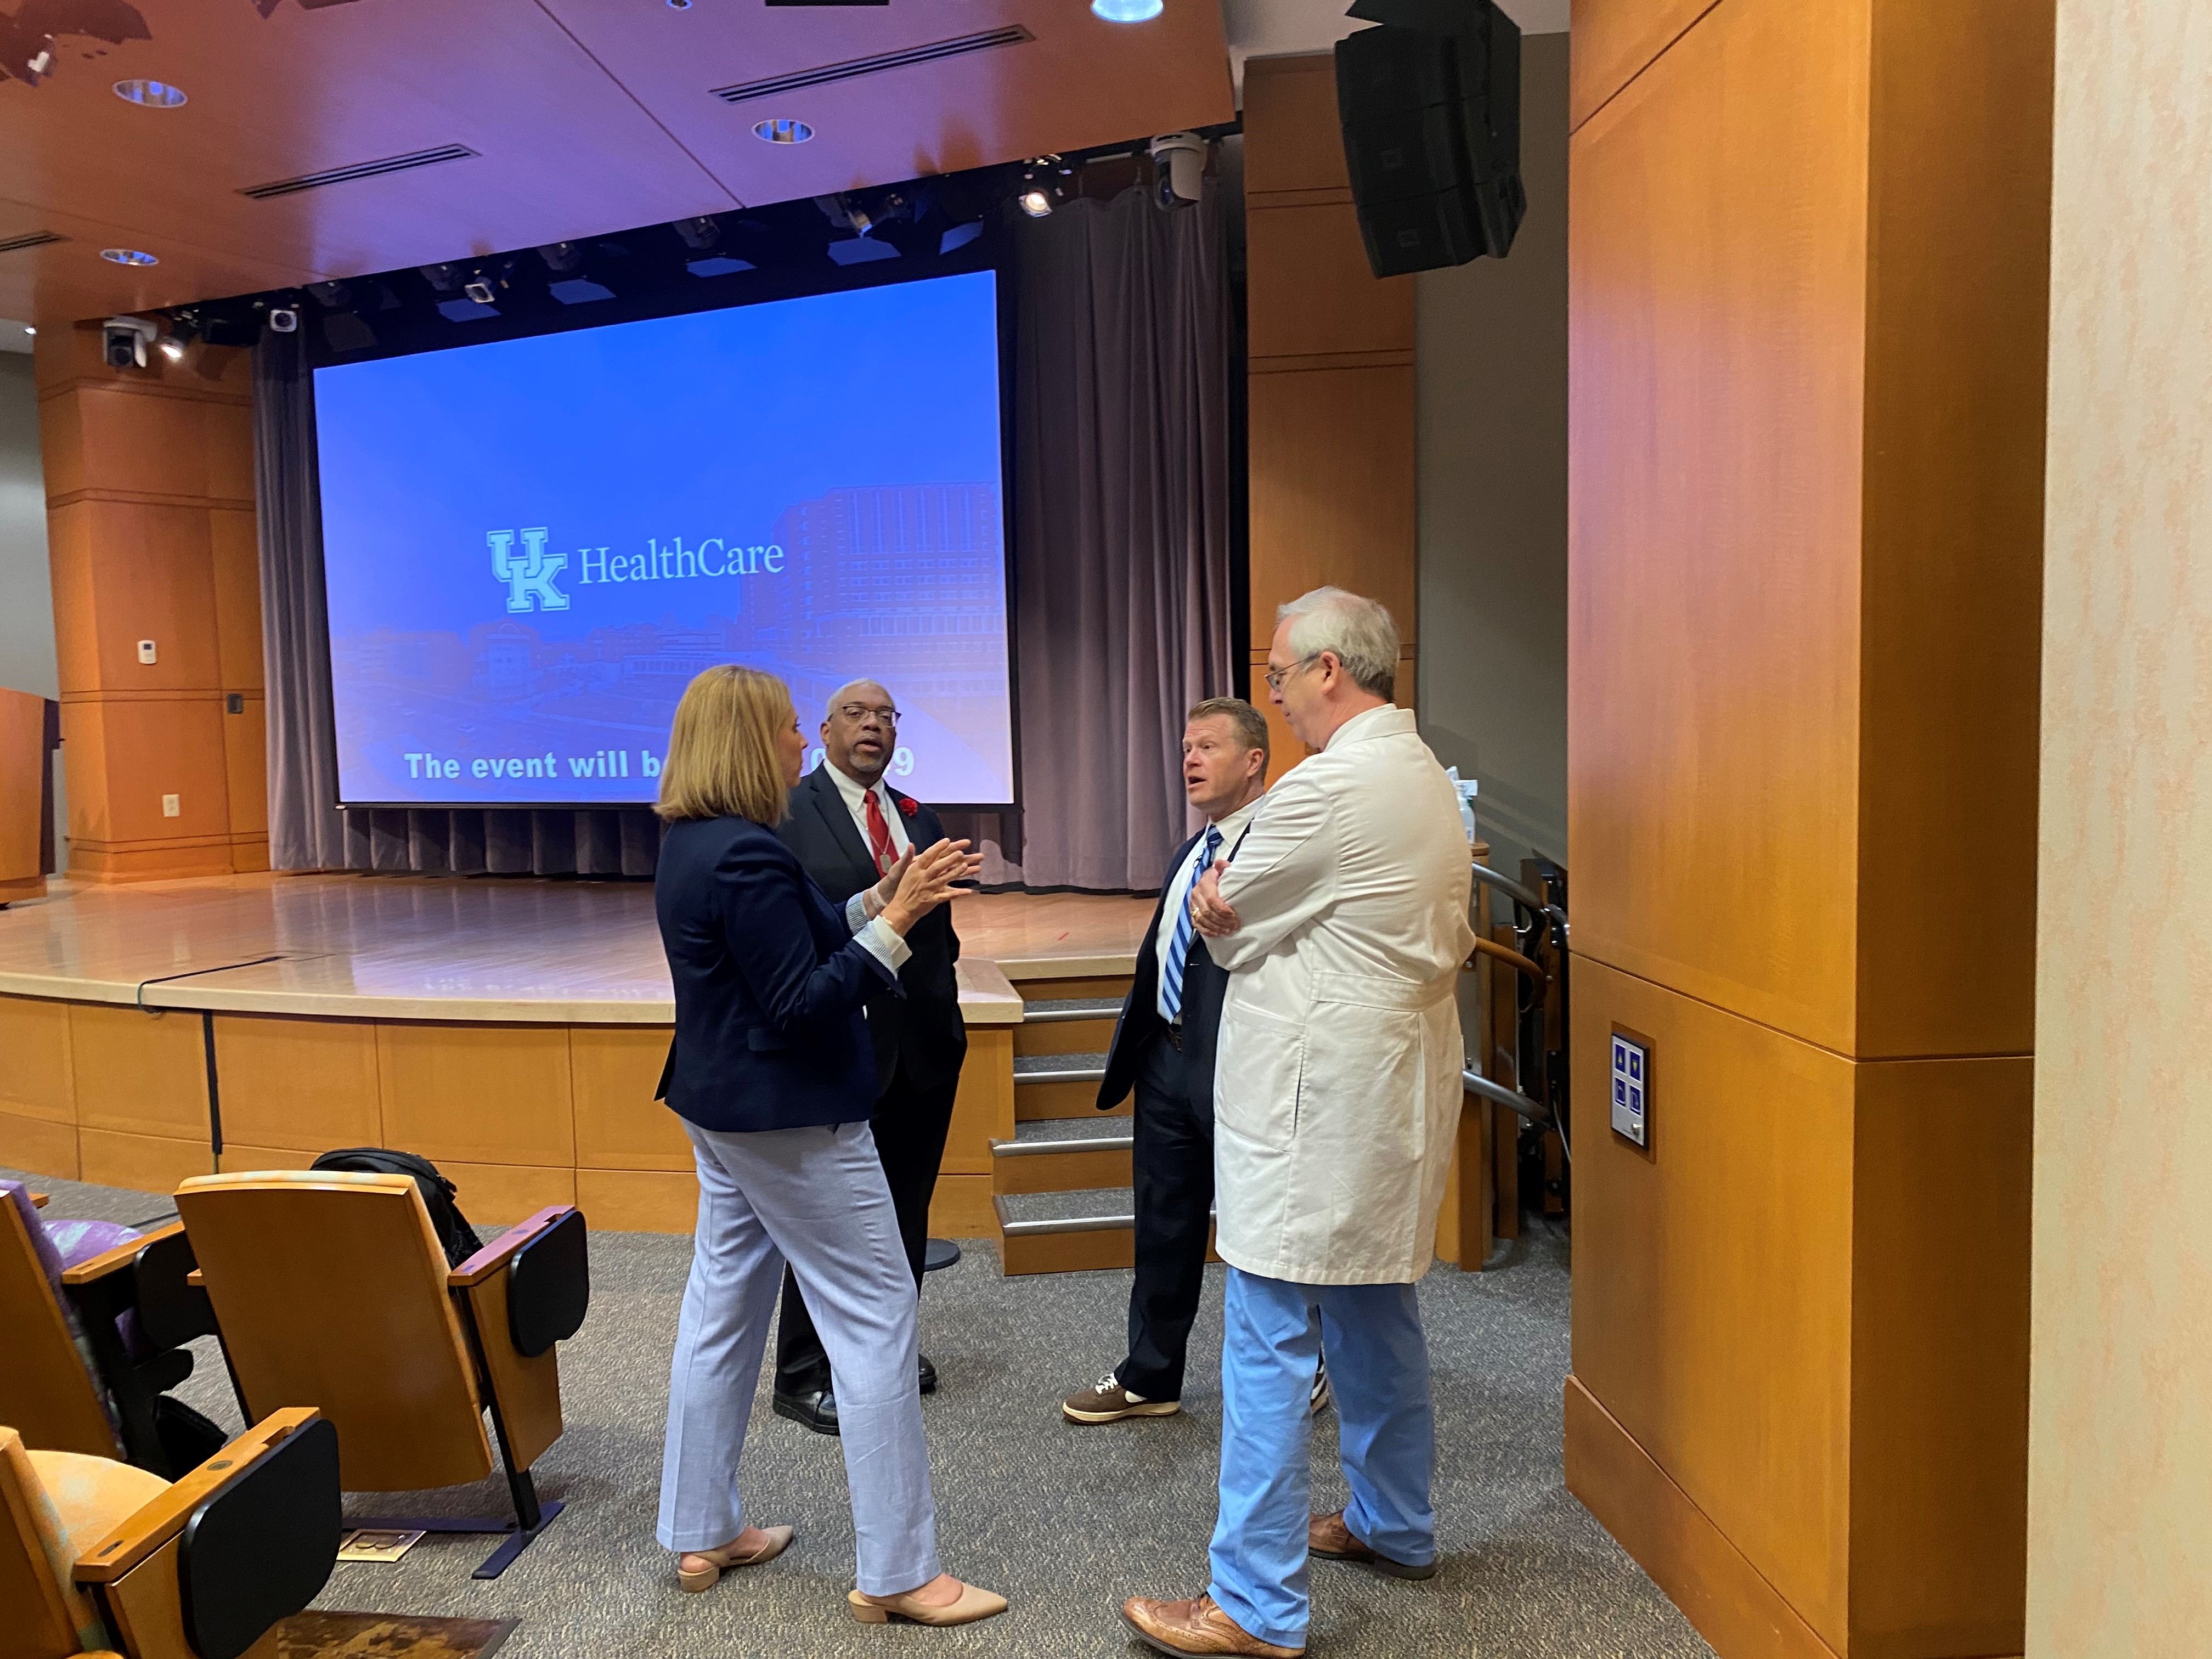 Gathering before the lecture with Tait Shanafelt, MD